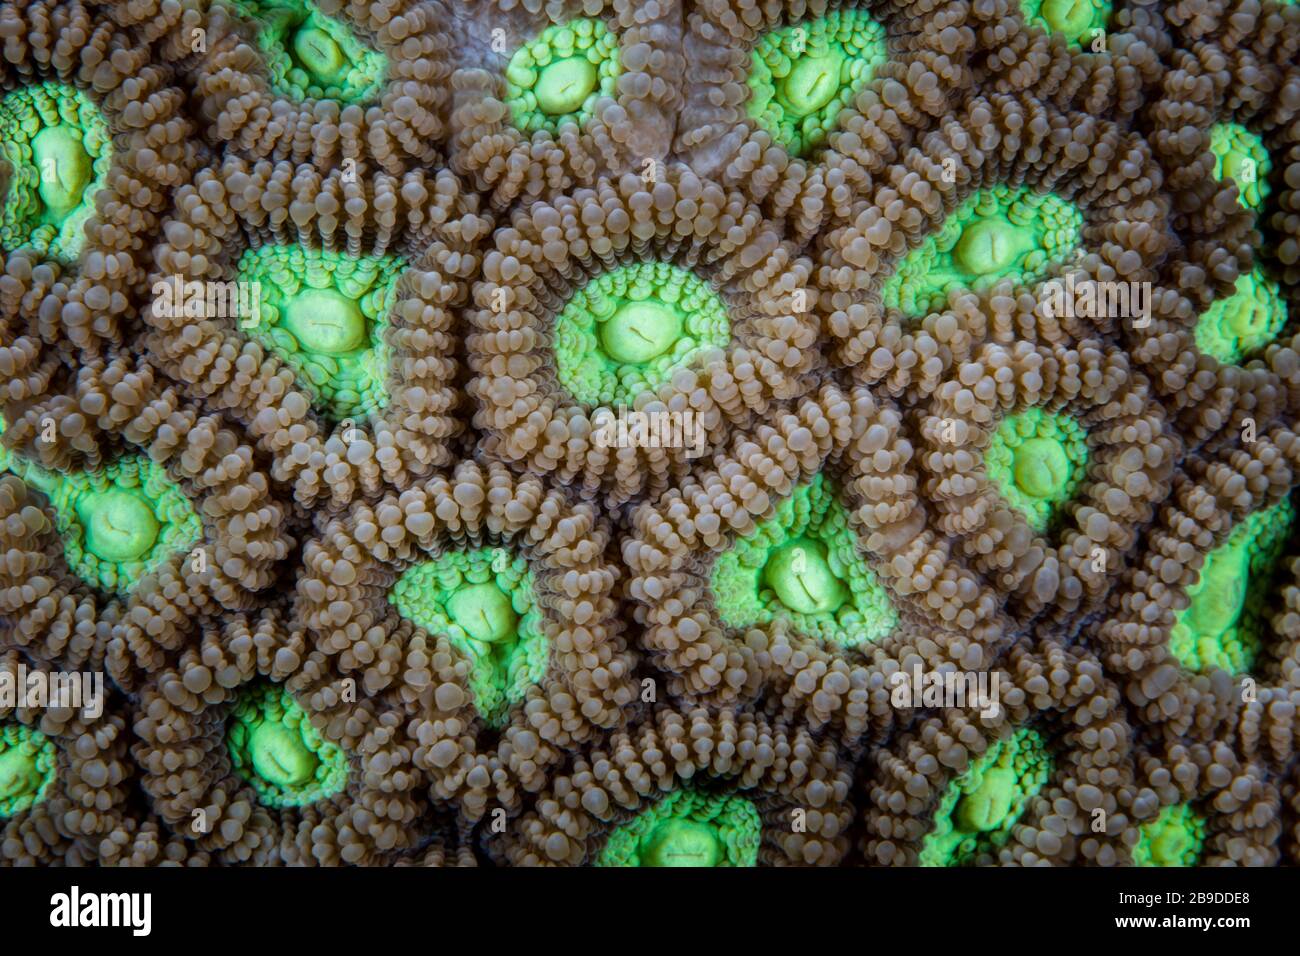 Detail of a reef-building coral colony, Favia sp., growing on a healthy reef. Stock Photo